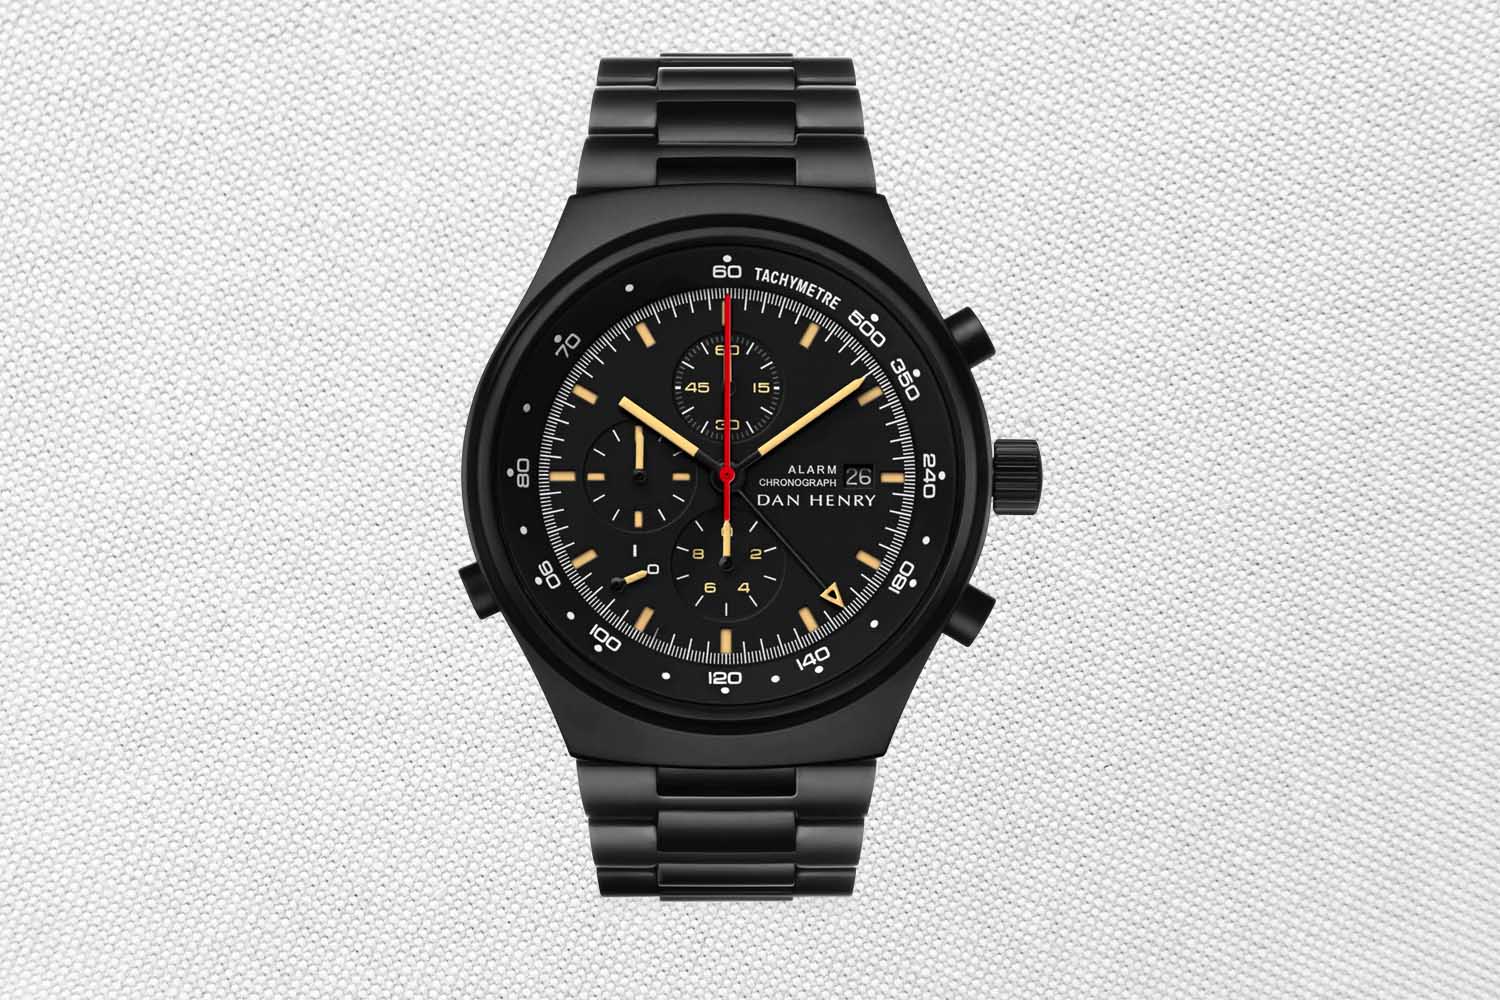 Dan Henry Maverick Chronograph, one of the best watches under $1,000